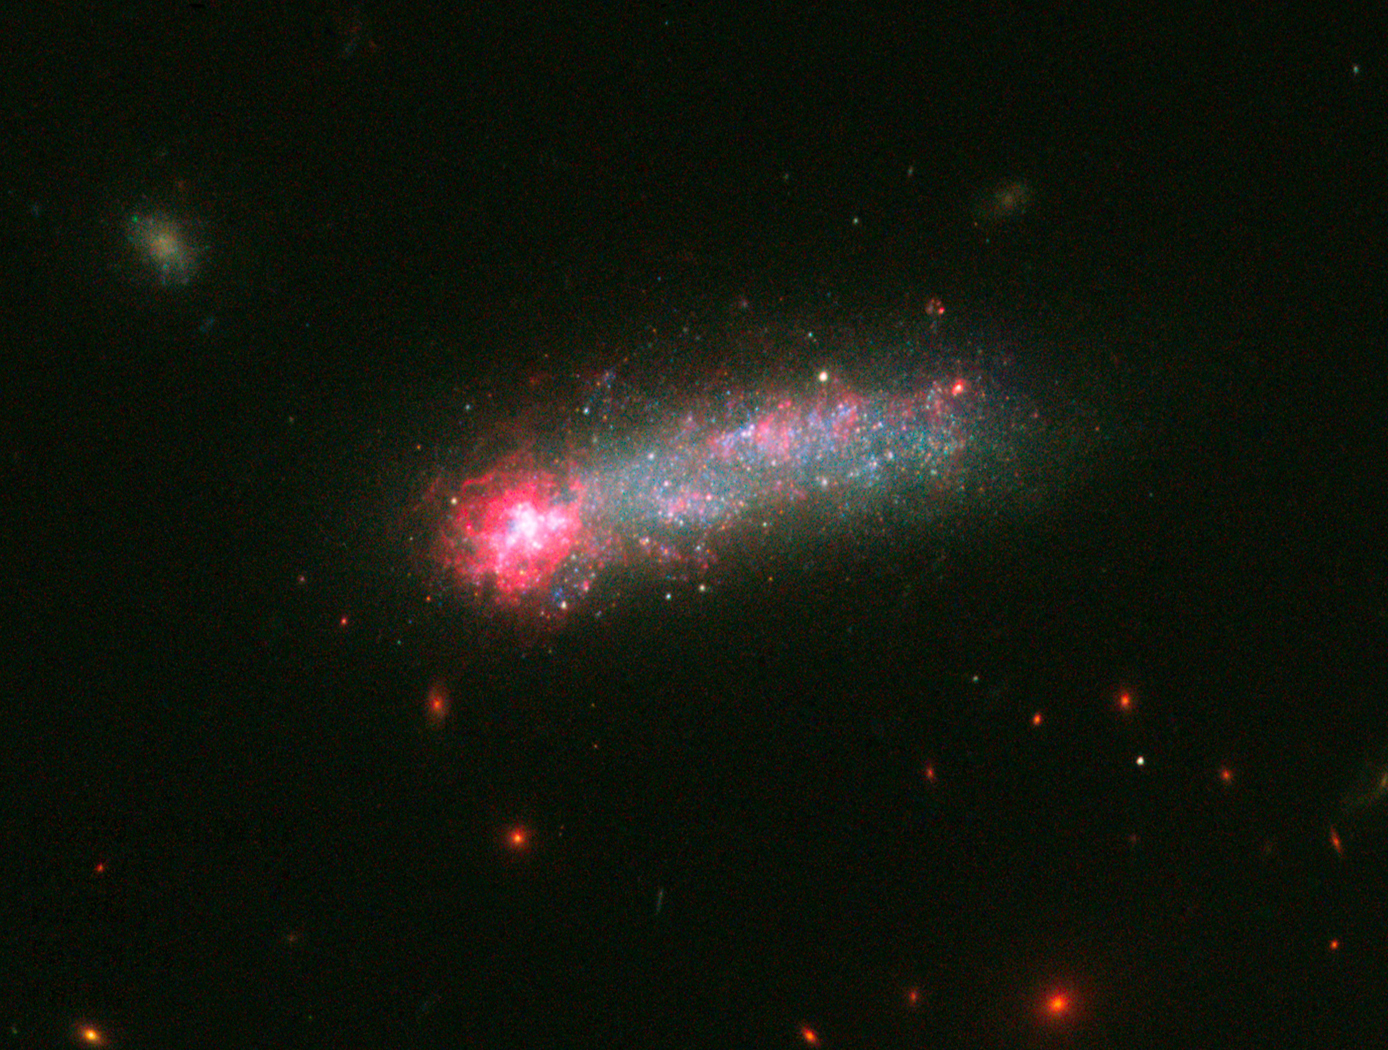 Hubble Reveals Stellar Fireworks in Skyrocket Galaxy -- A firestorm of star birth is lighting up one end of the diminutive galaxy Kiso 5639.